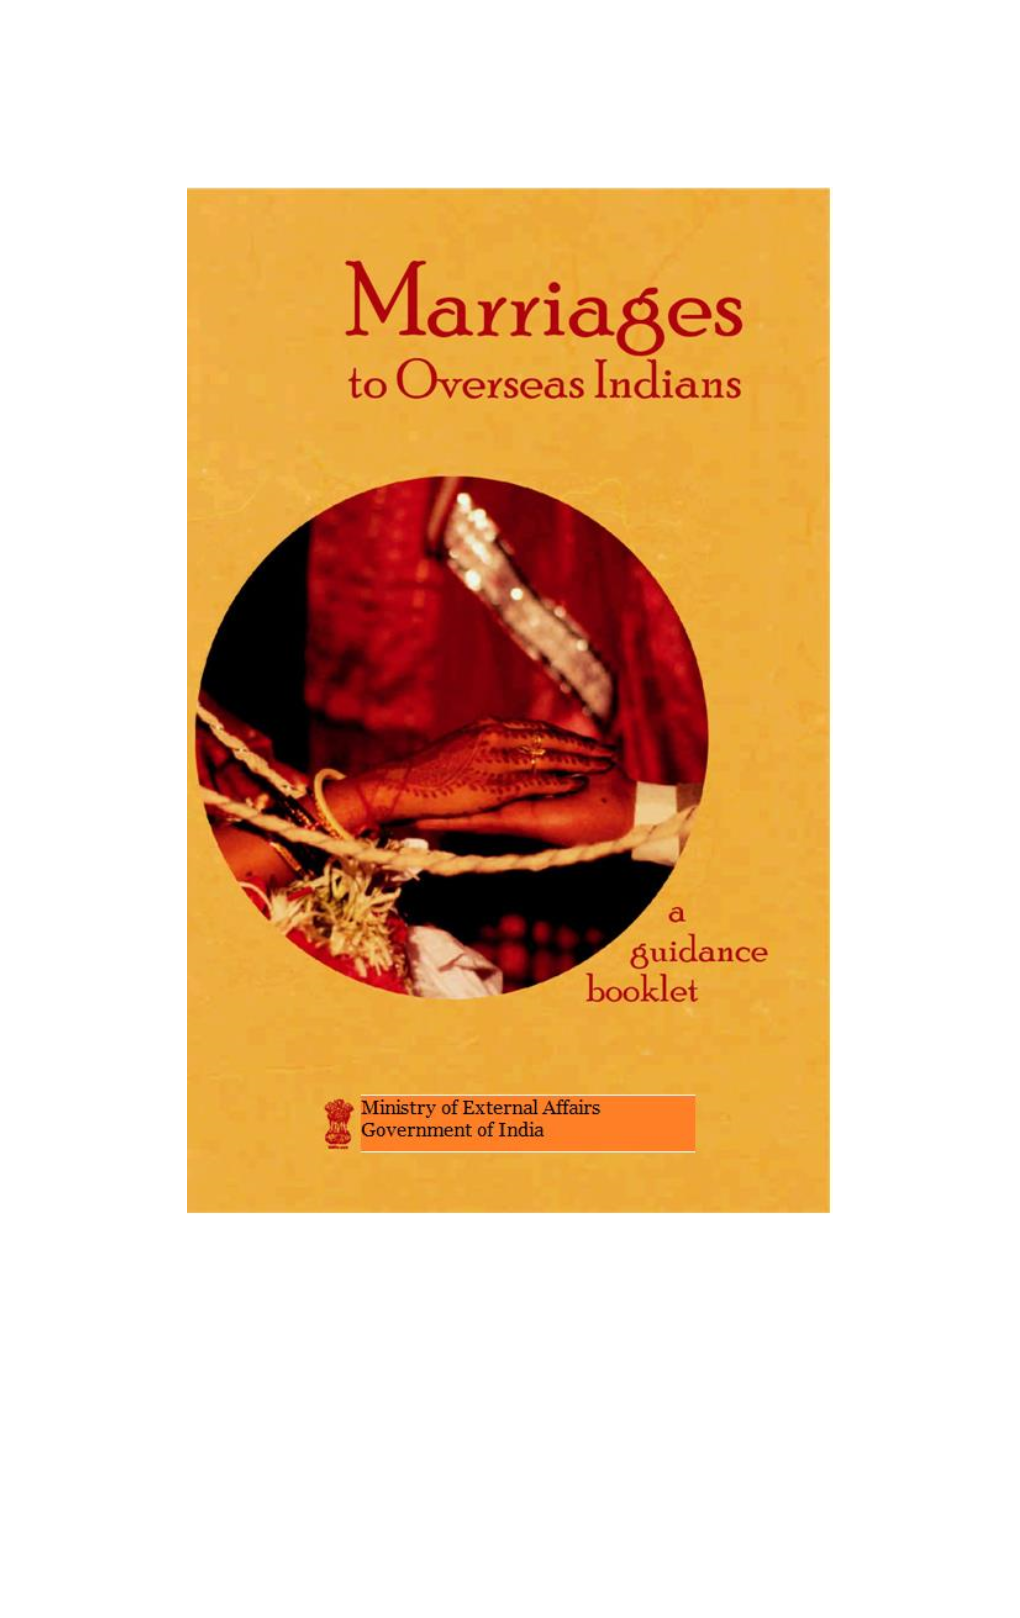 Guidance Booklet for Marriages to Overseas Indians